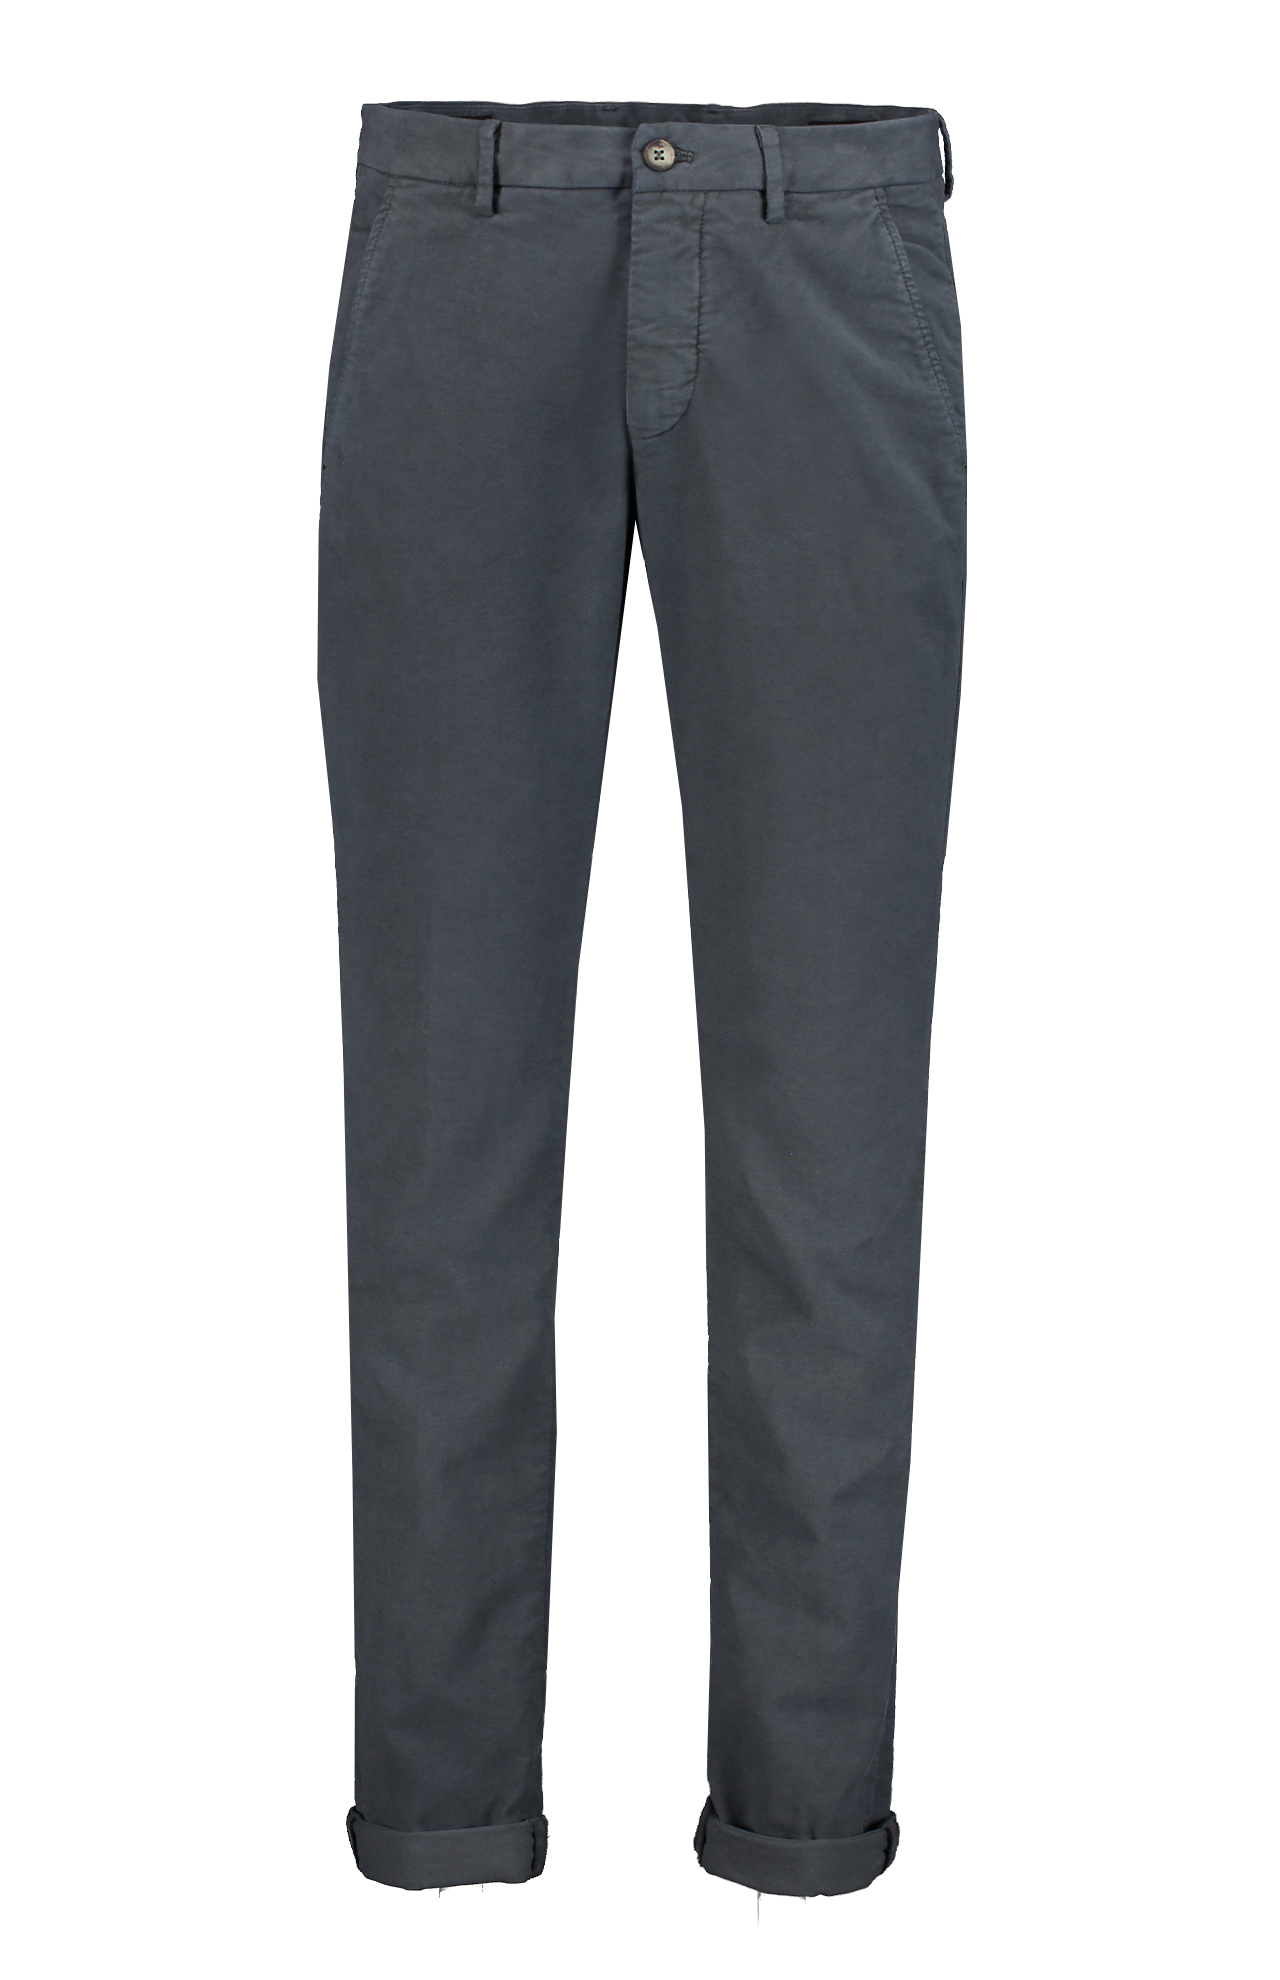 Mason's Torino Style Moleskin Chino Pant in Charcoal Grey Mannequin Image  (6955219976307)